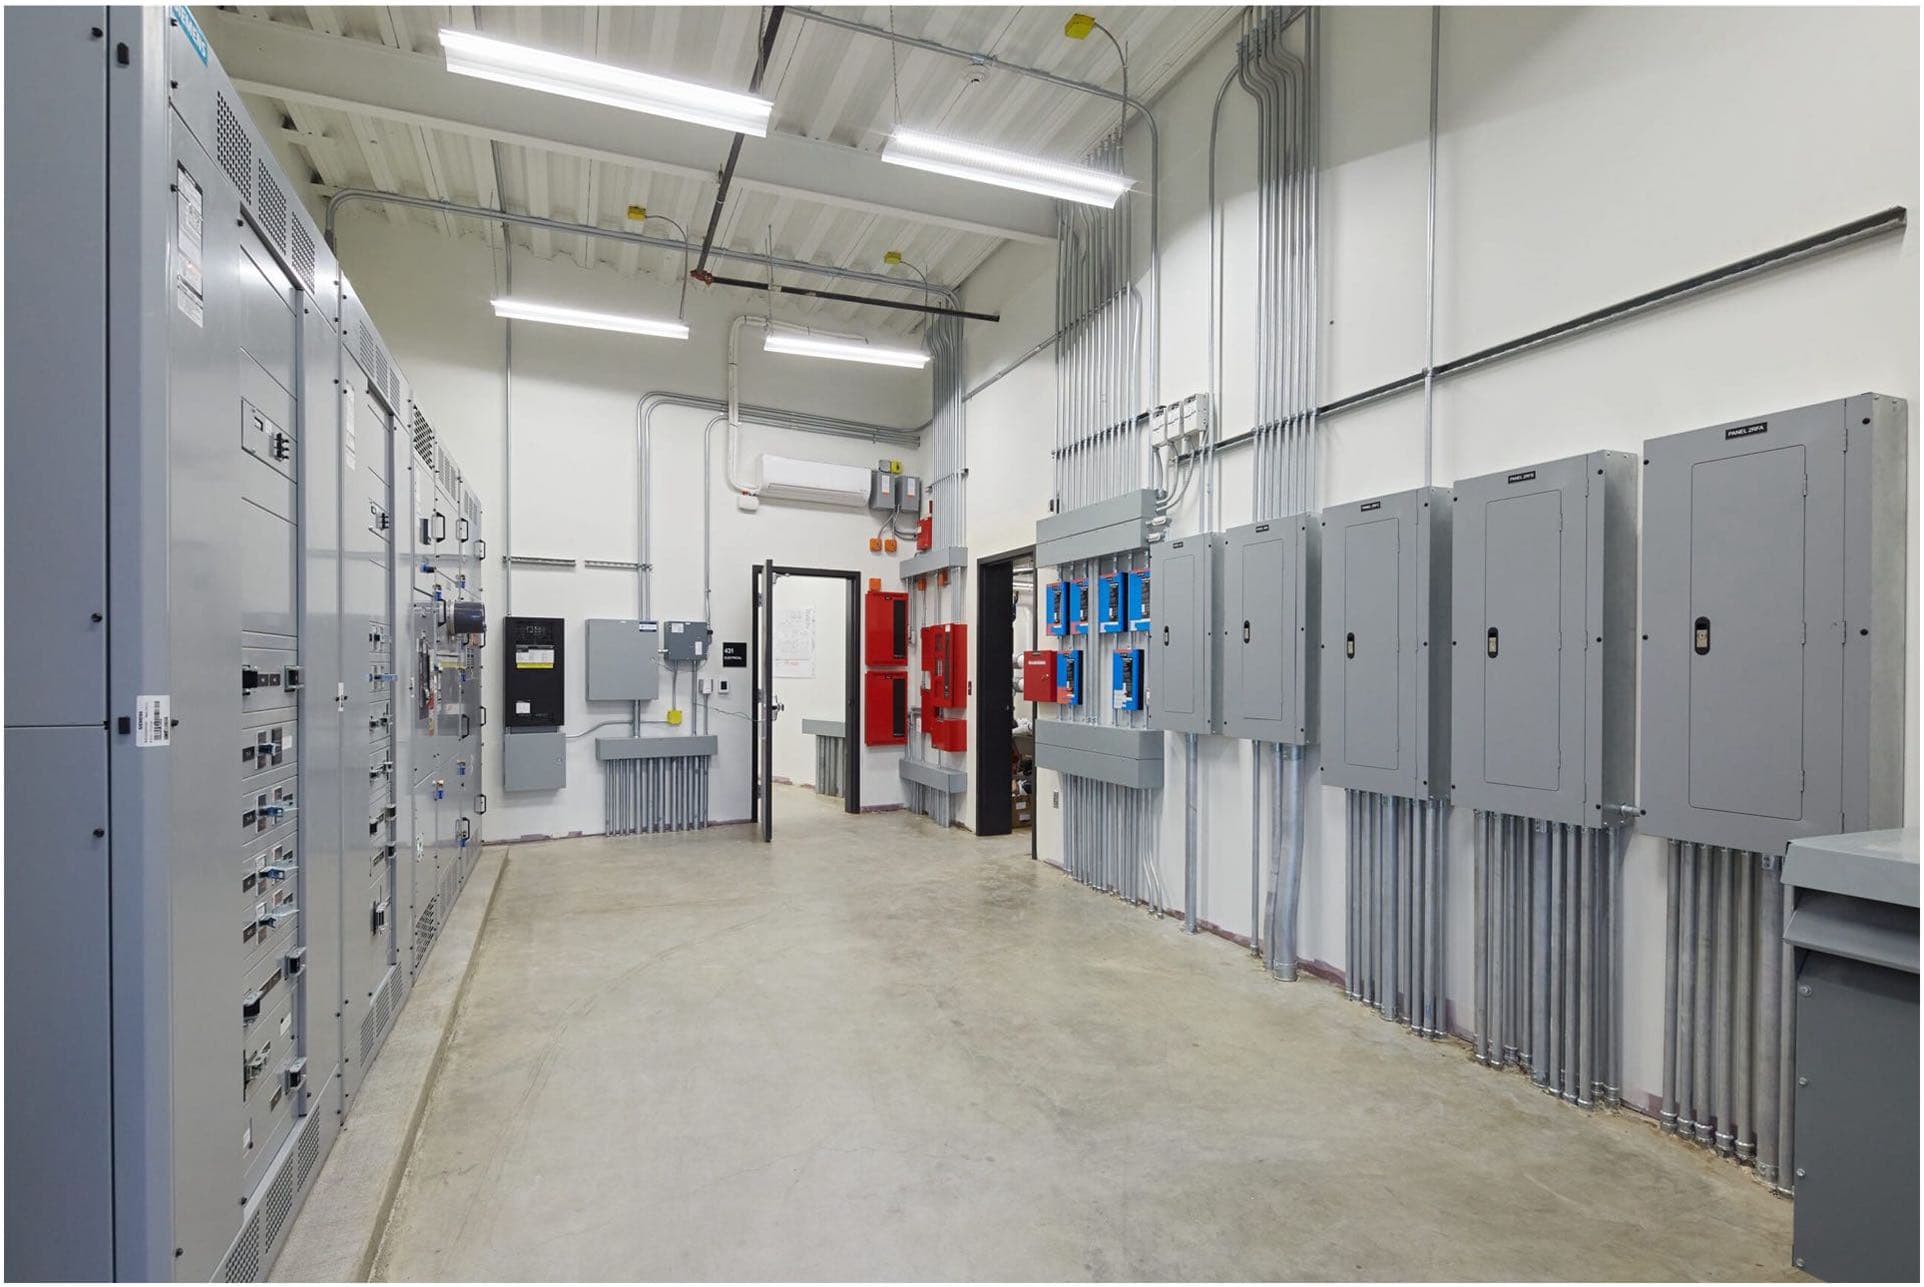 A row of electrical panels in a commercial setting to illustrate Commercial Maintenance and Troubleshooting